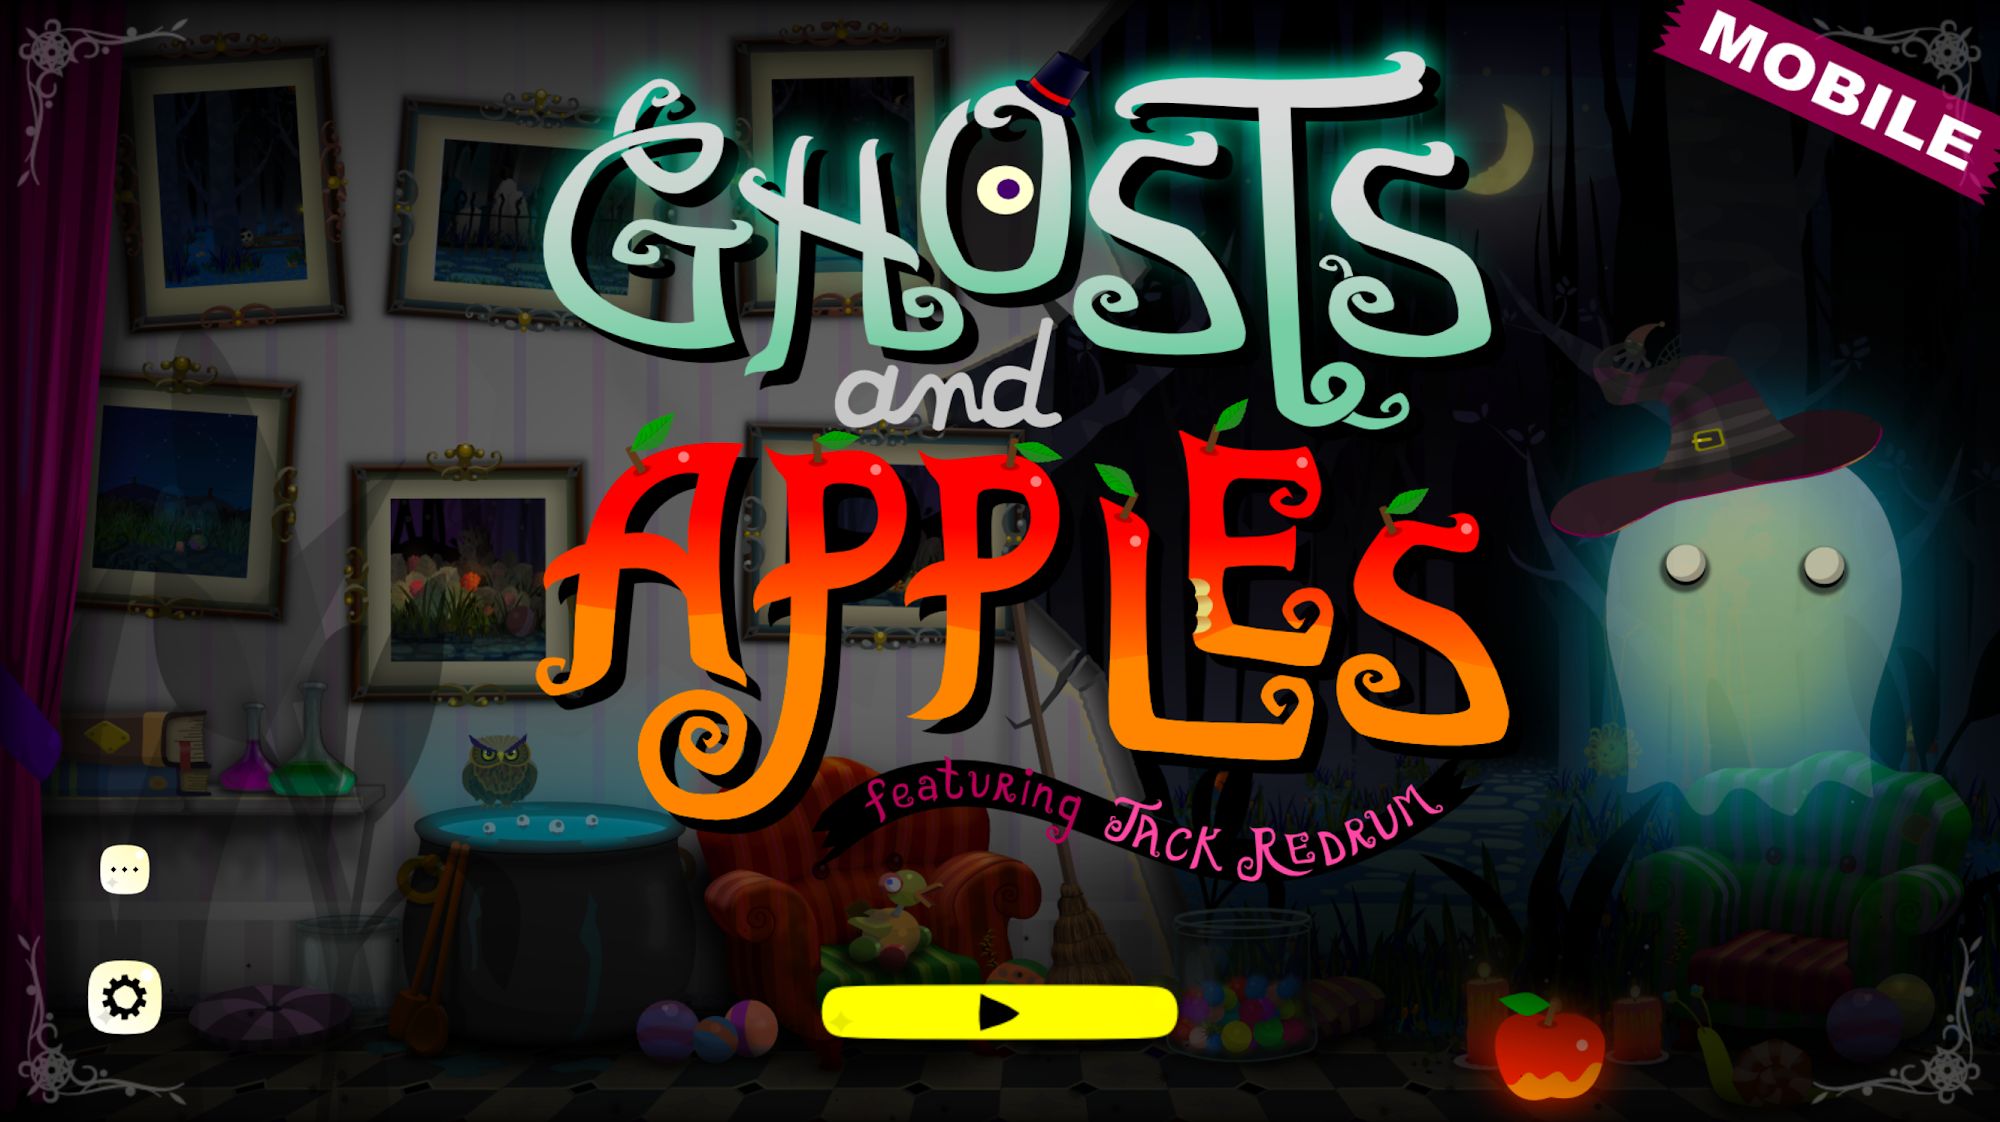 Descargar Ghosts and Apples Mobile gratis para Android.